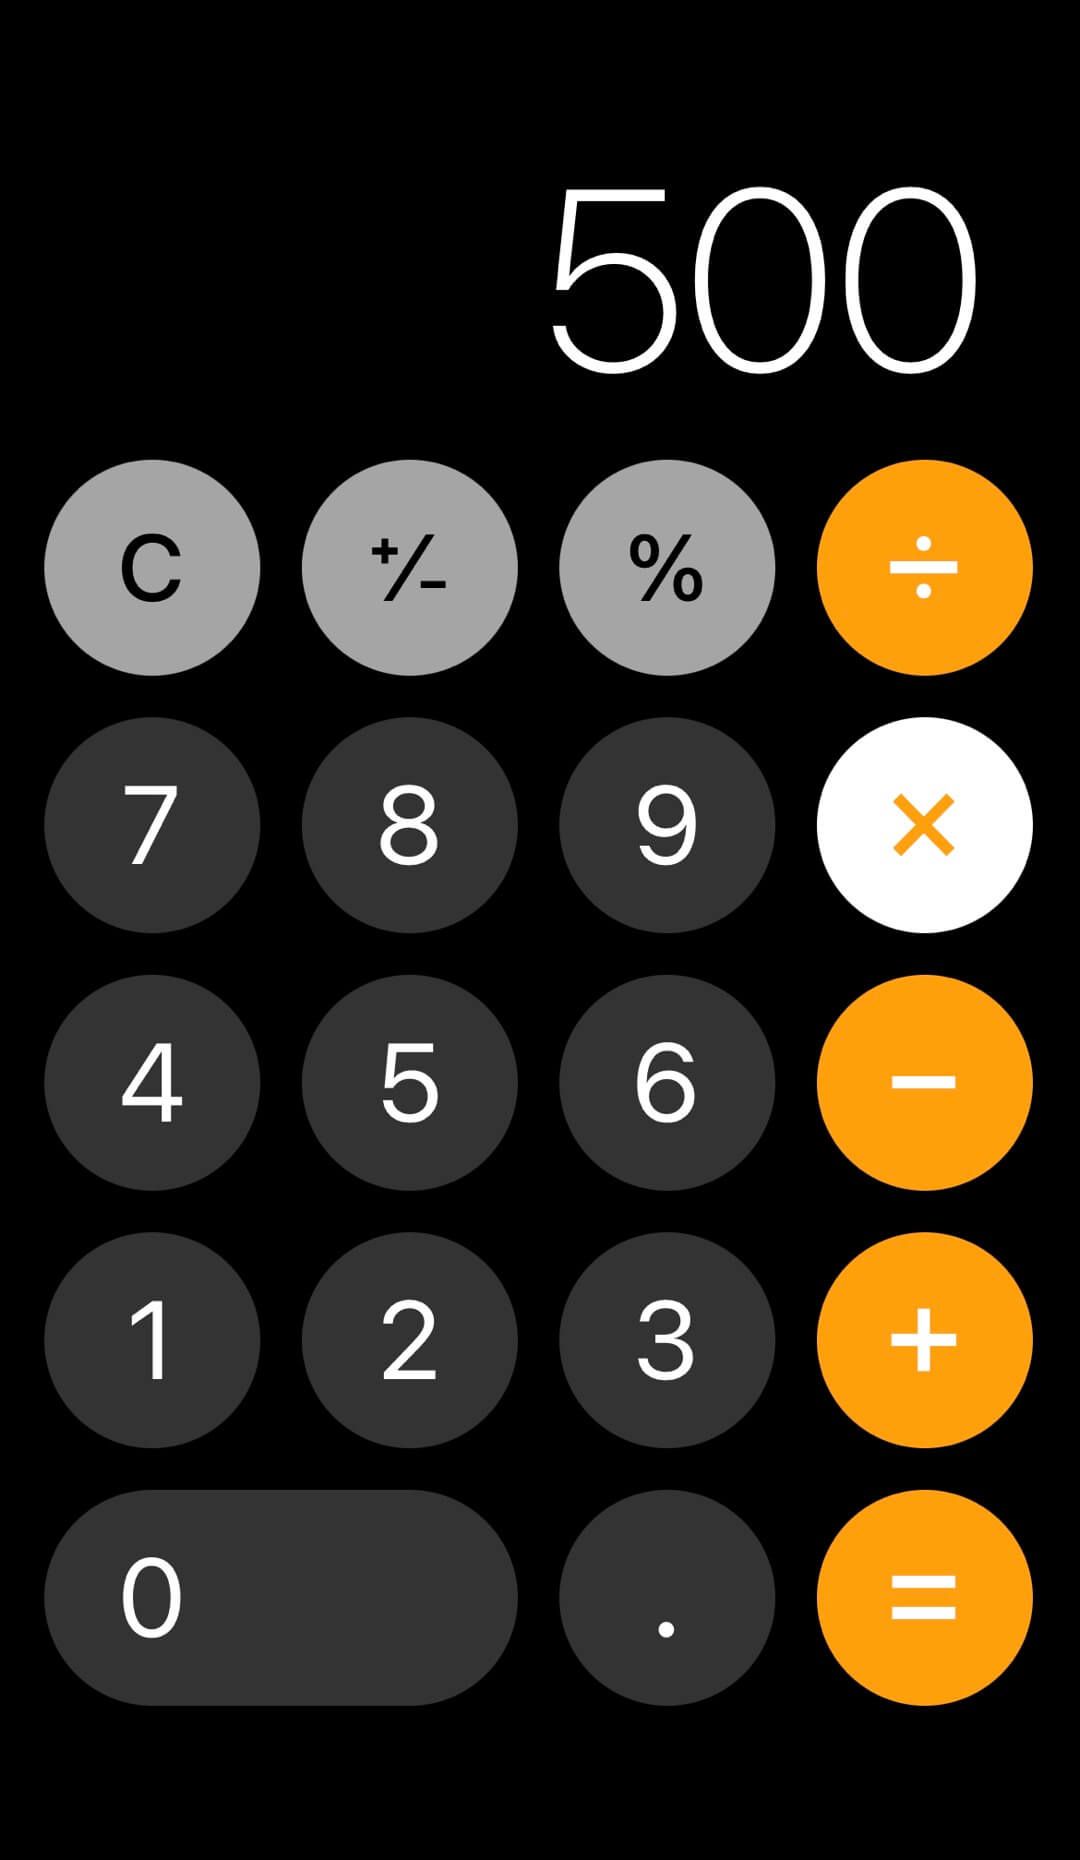 $500 on iPhone calculator for moving expense.